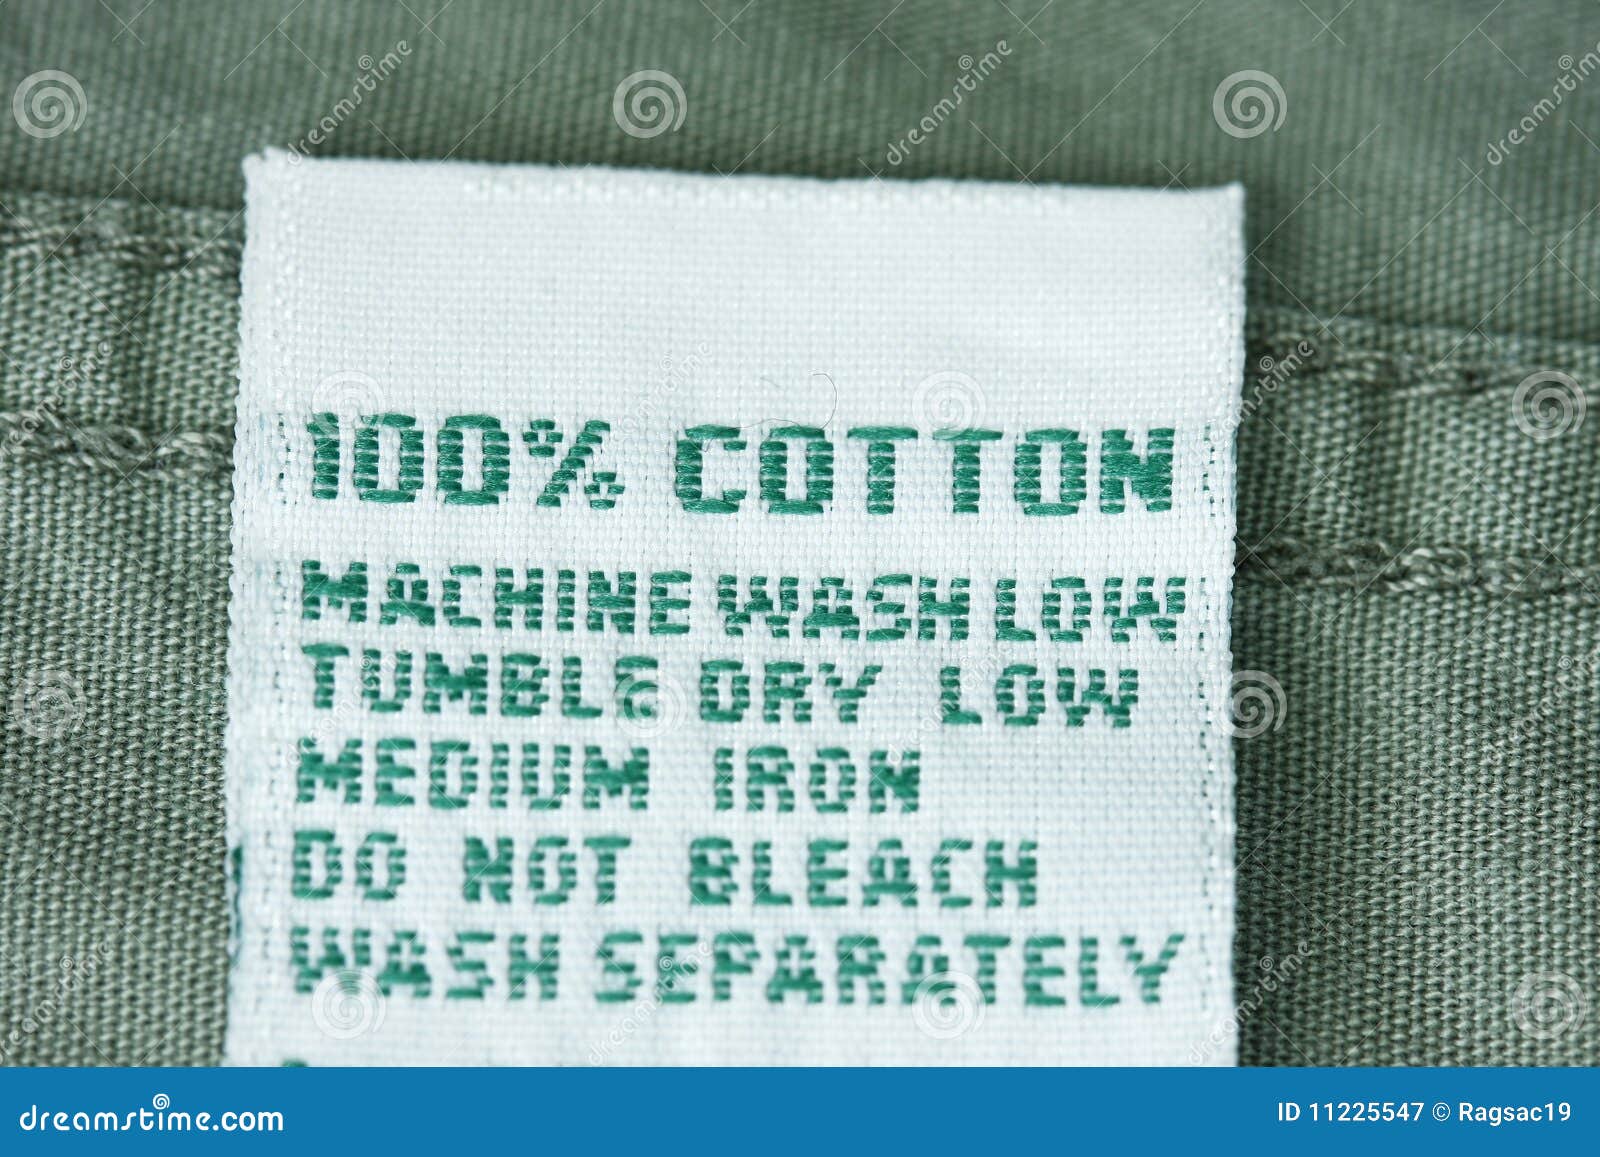 100 Cotton label stock image. Image of close, composition - 11225547